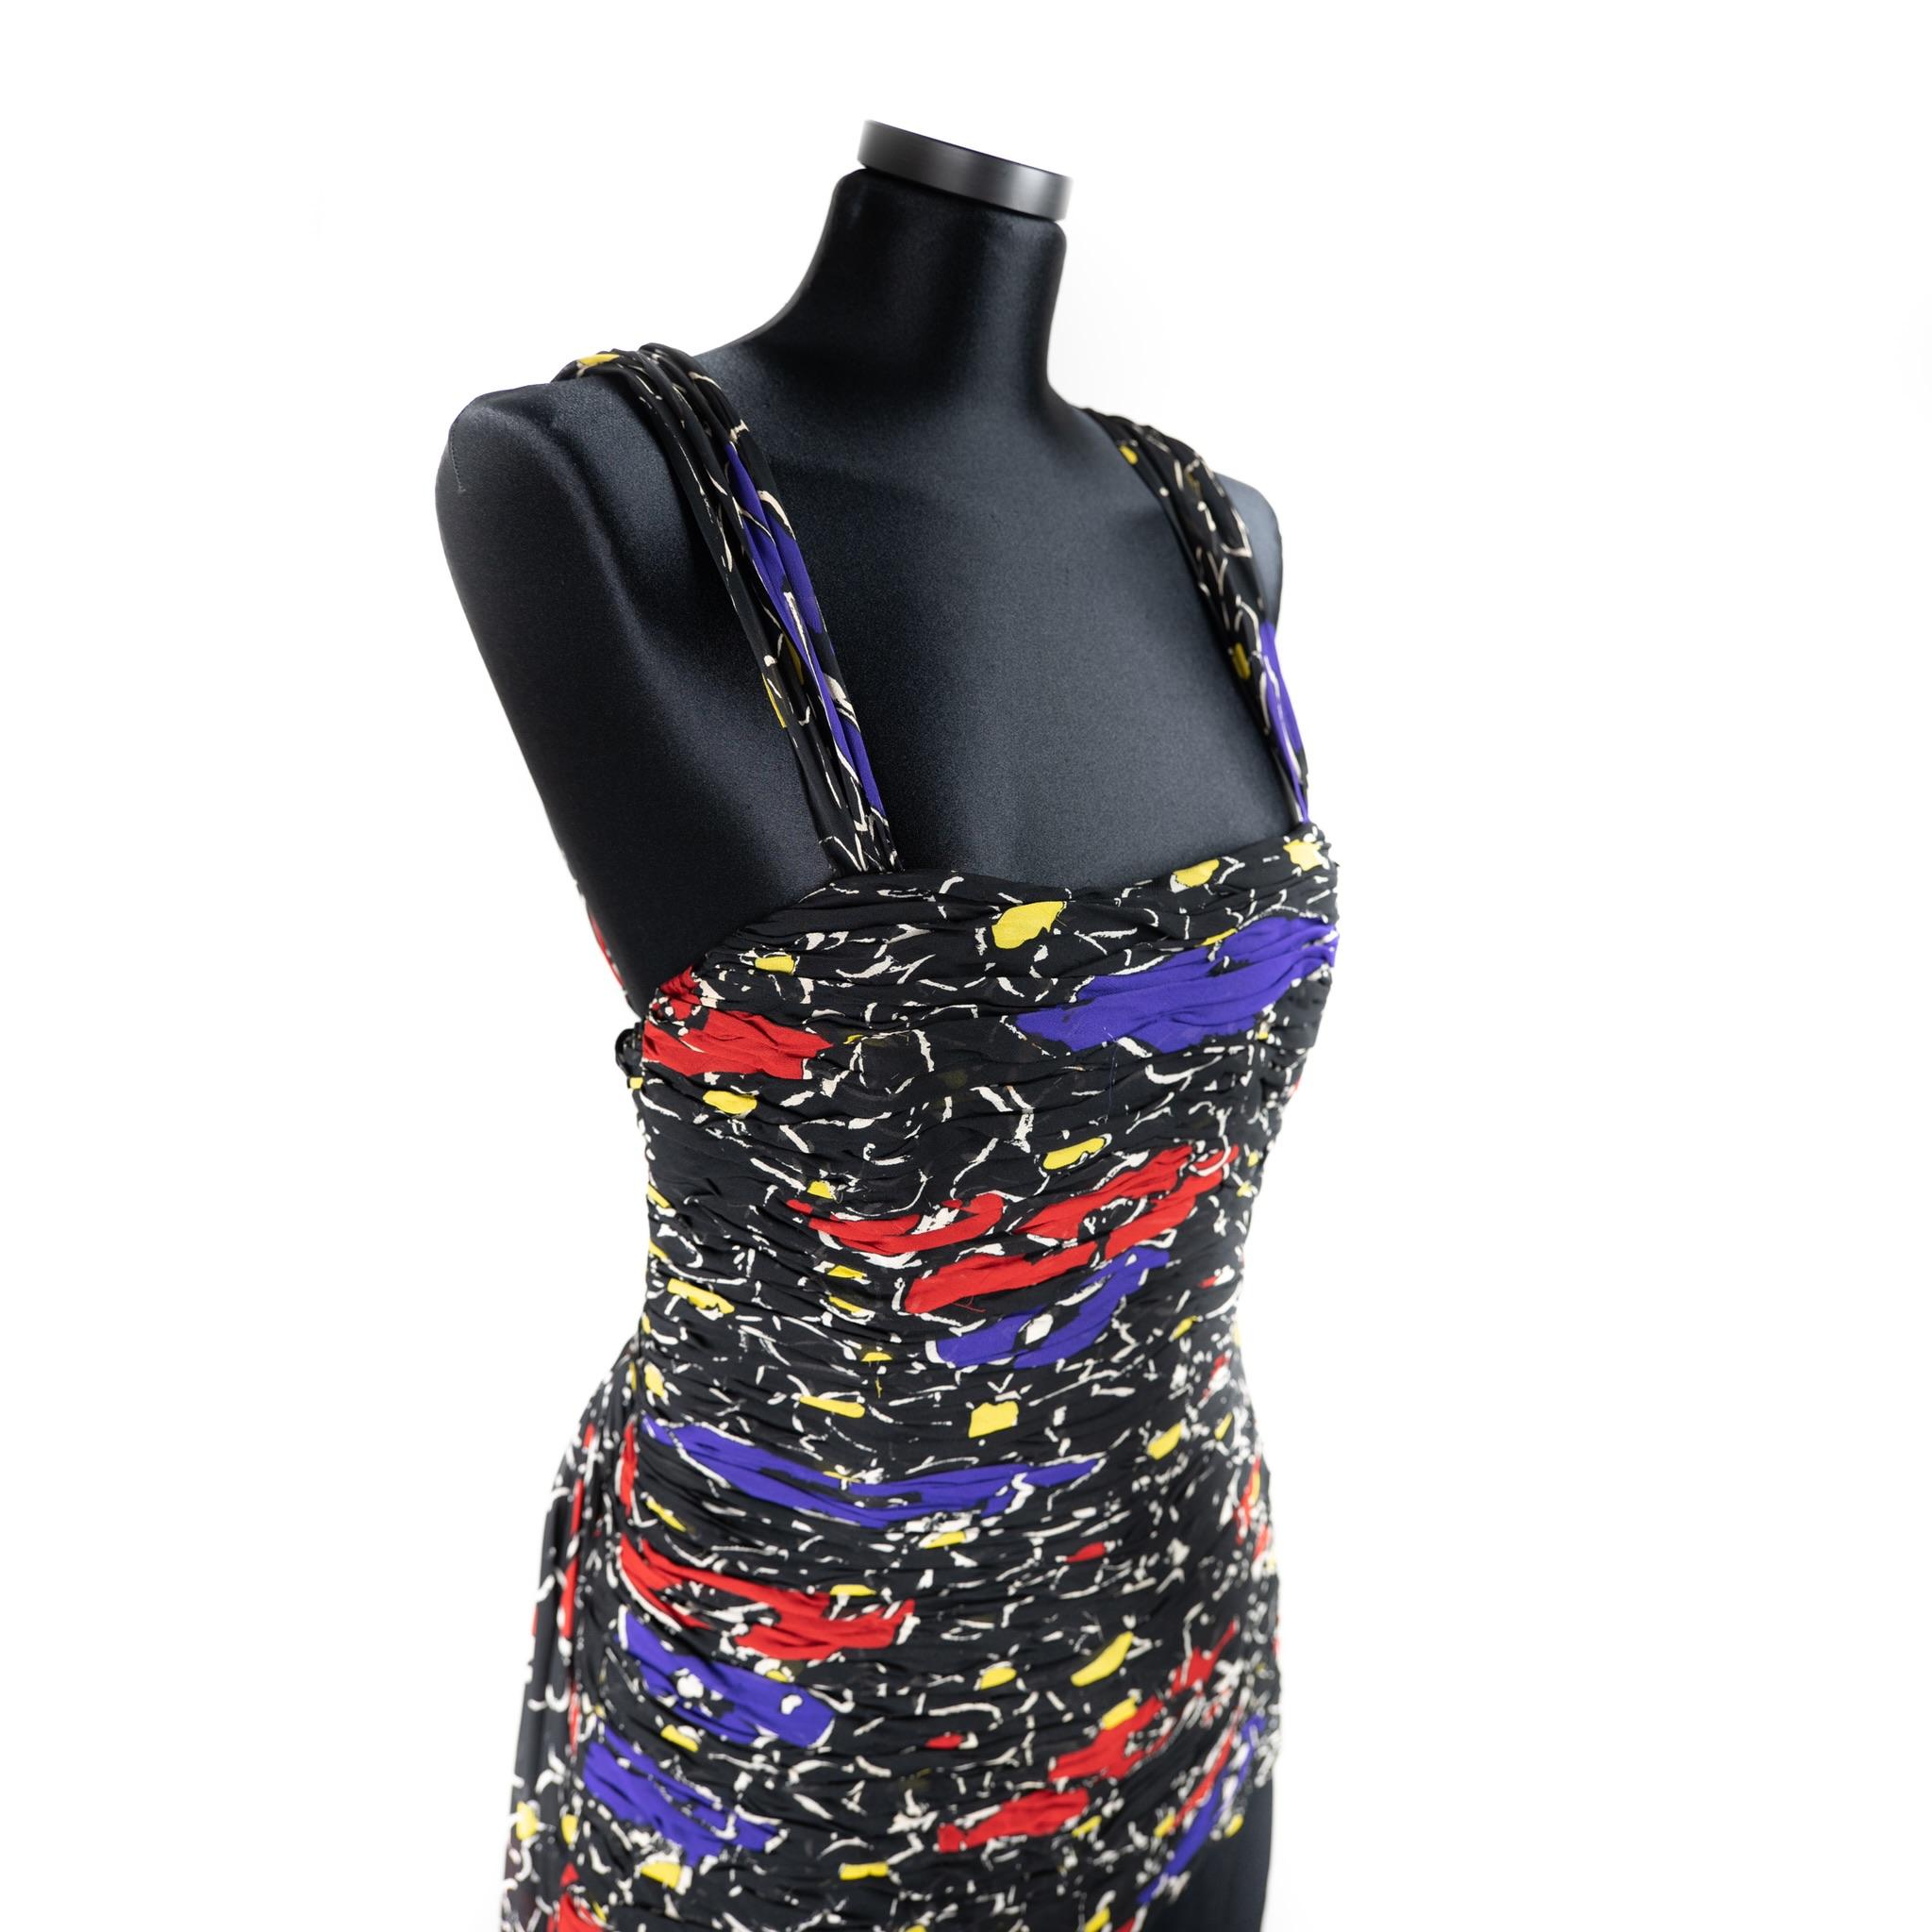 Valentino Boutique Night Dress. Circa 1979.
The composition label is missing.
This Valentino dress is made from a double layered silk chiffon designed with a flower print of blue, red and black. The bodice of the dress is heavily ruched accentuating